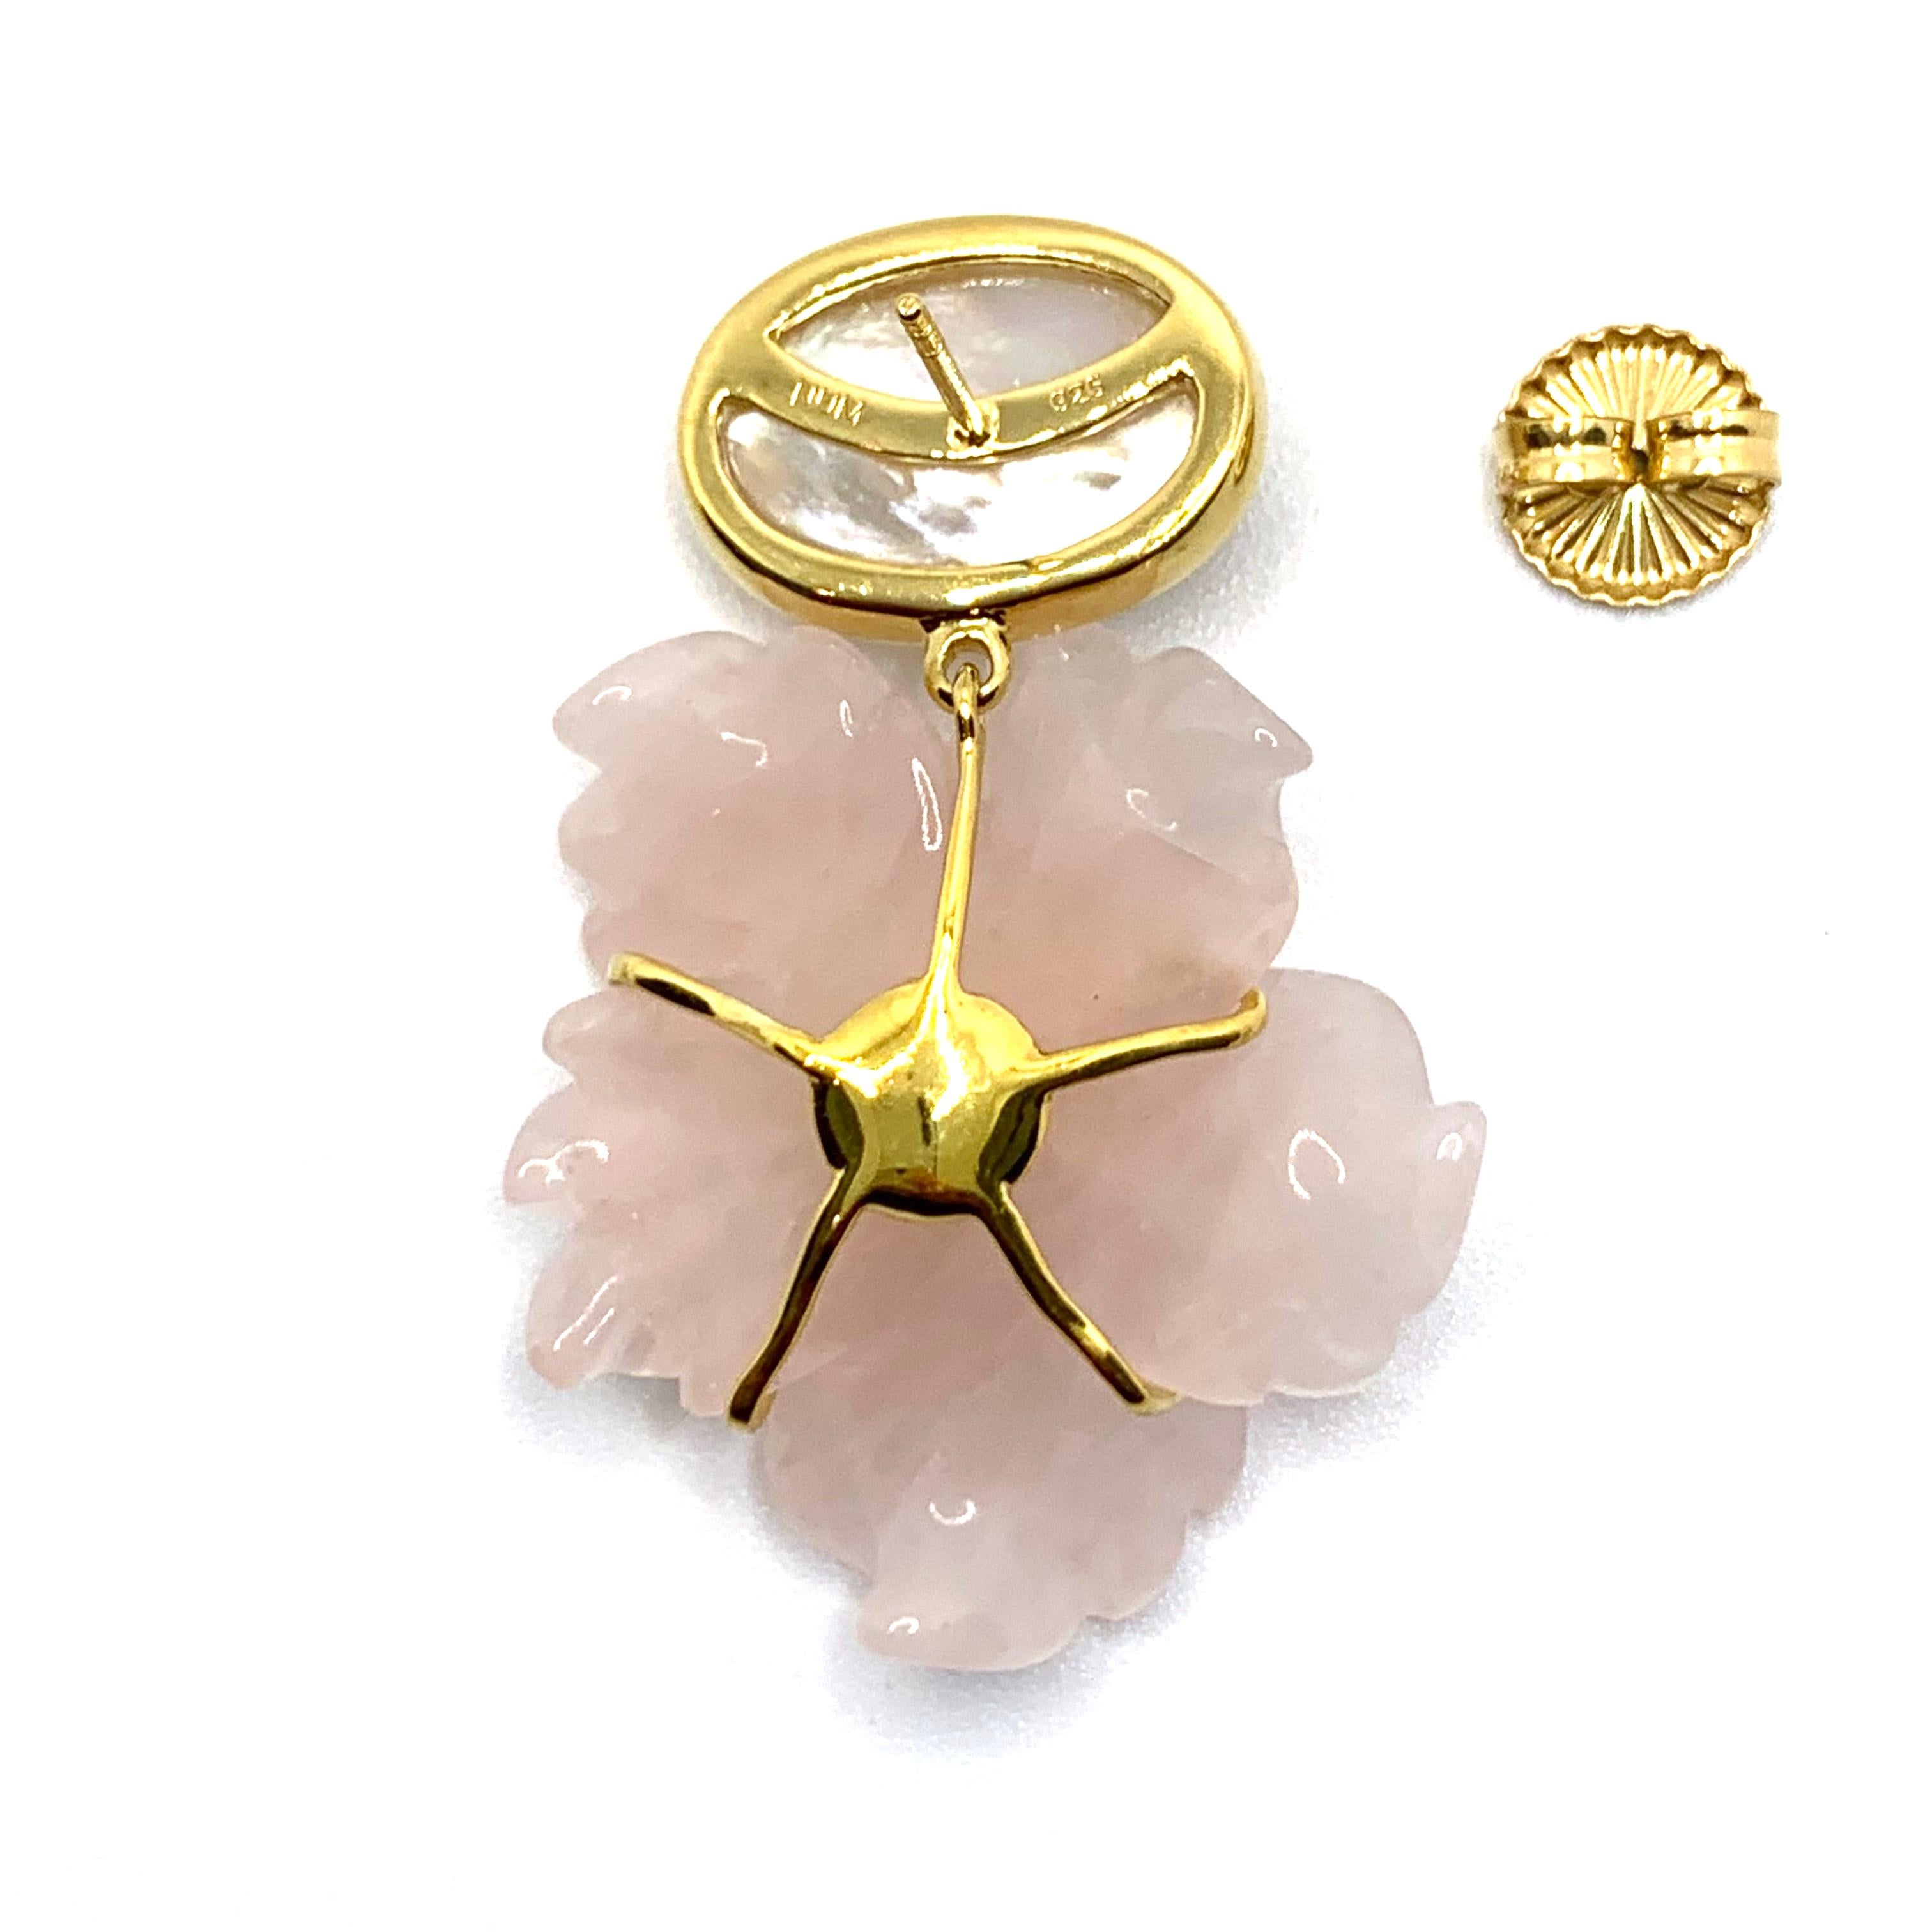 Stunning Cabochon Mother of Pearl and Carved Rose Quartz Flower Drop Earrings 1